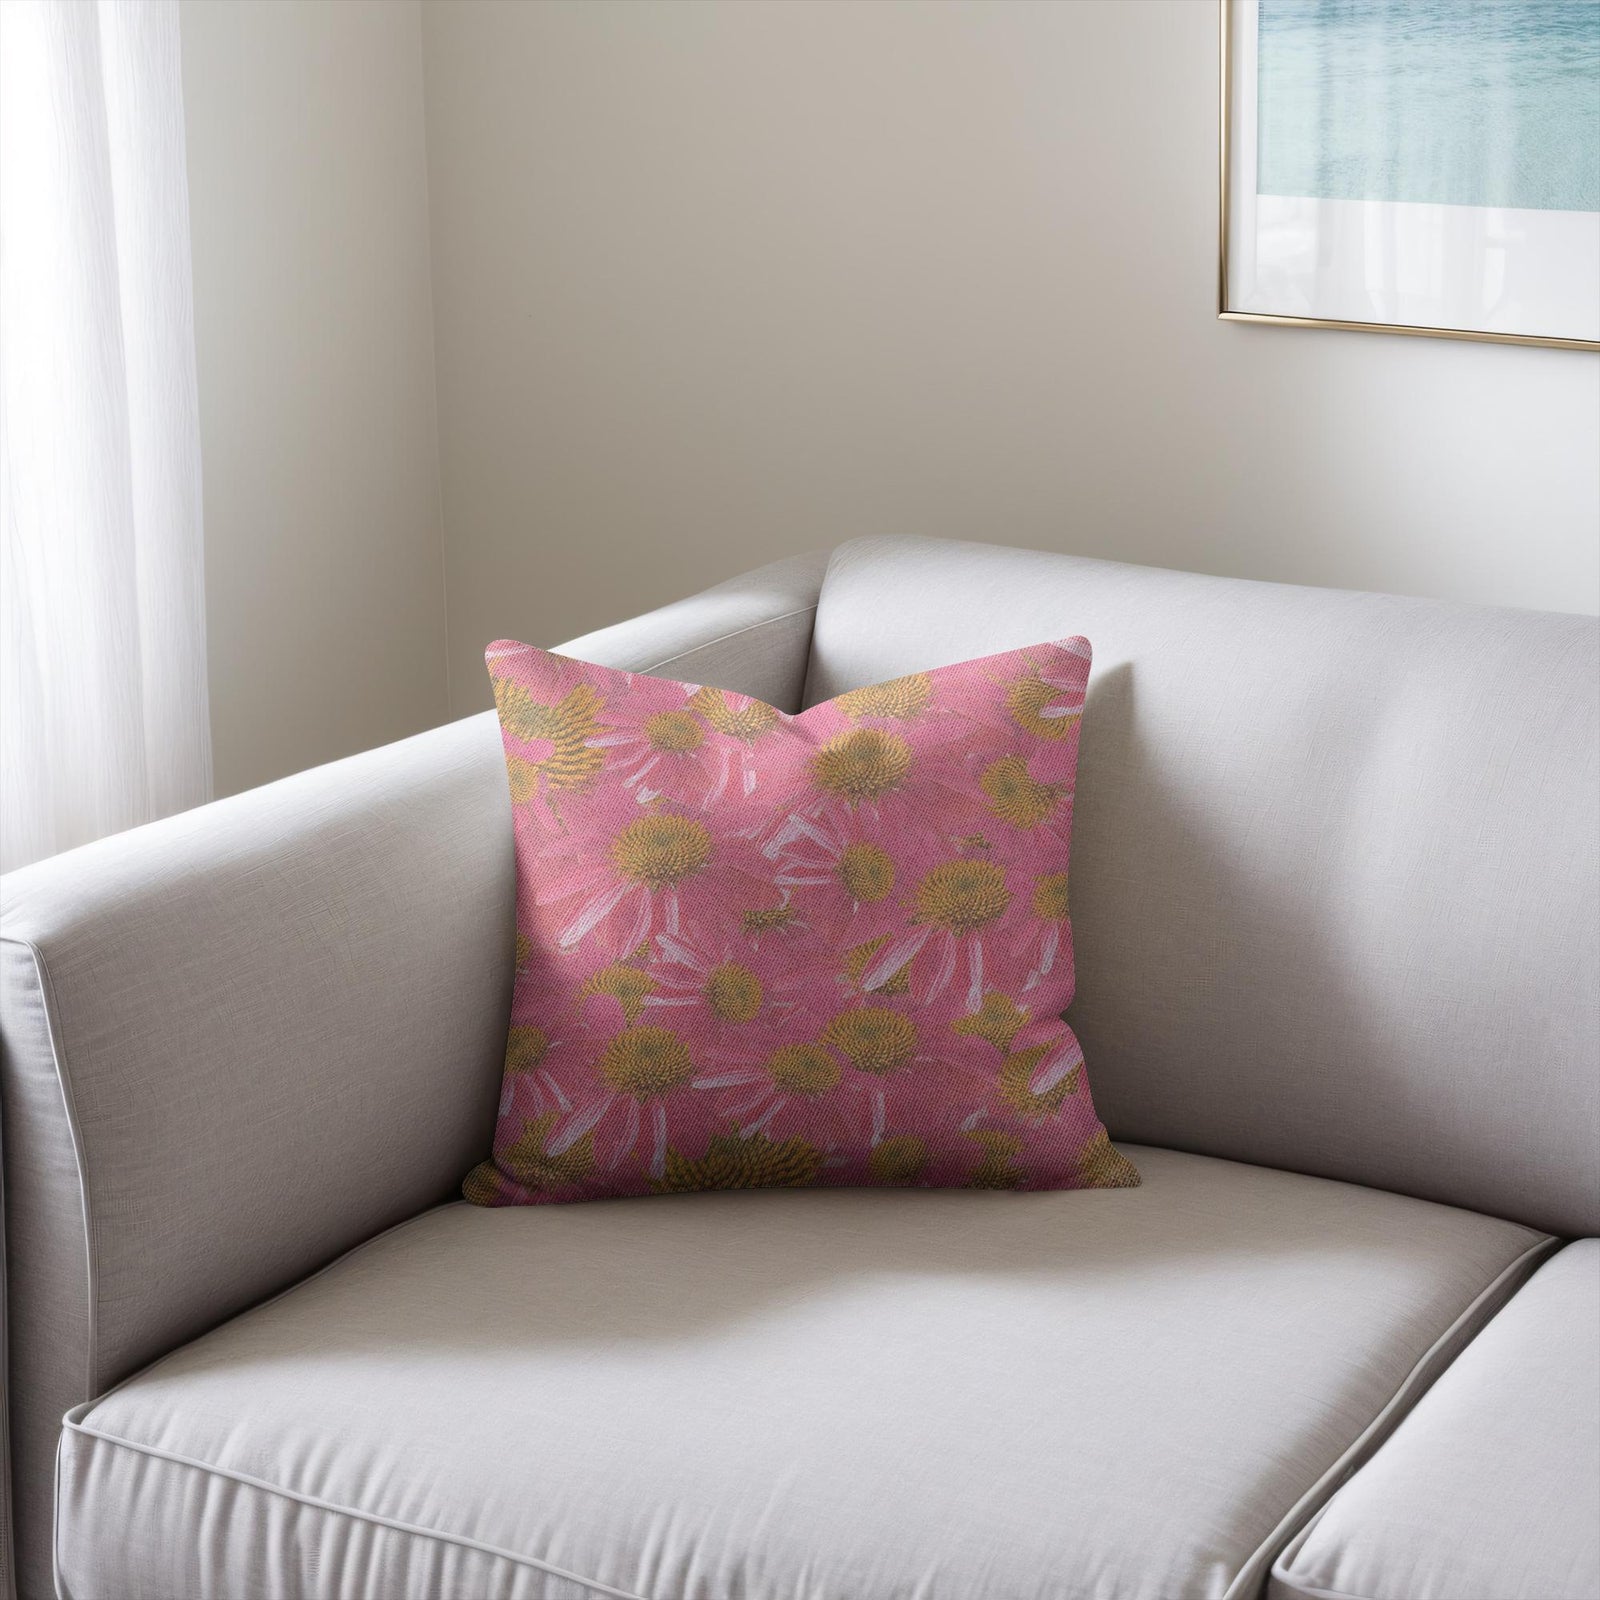 Cotton/poly blend woven pillow echinacea floral pattern